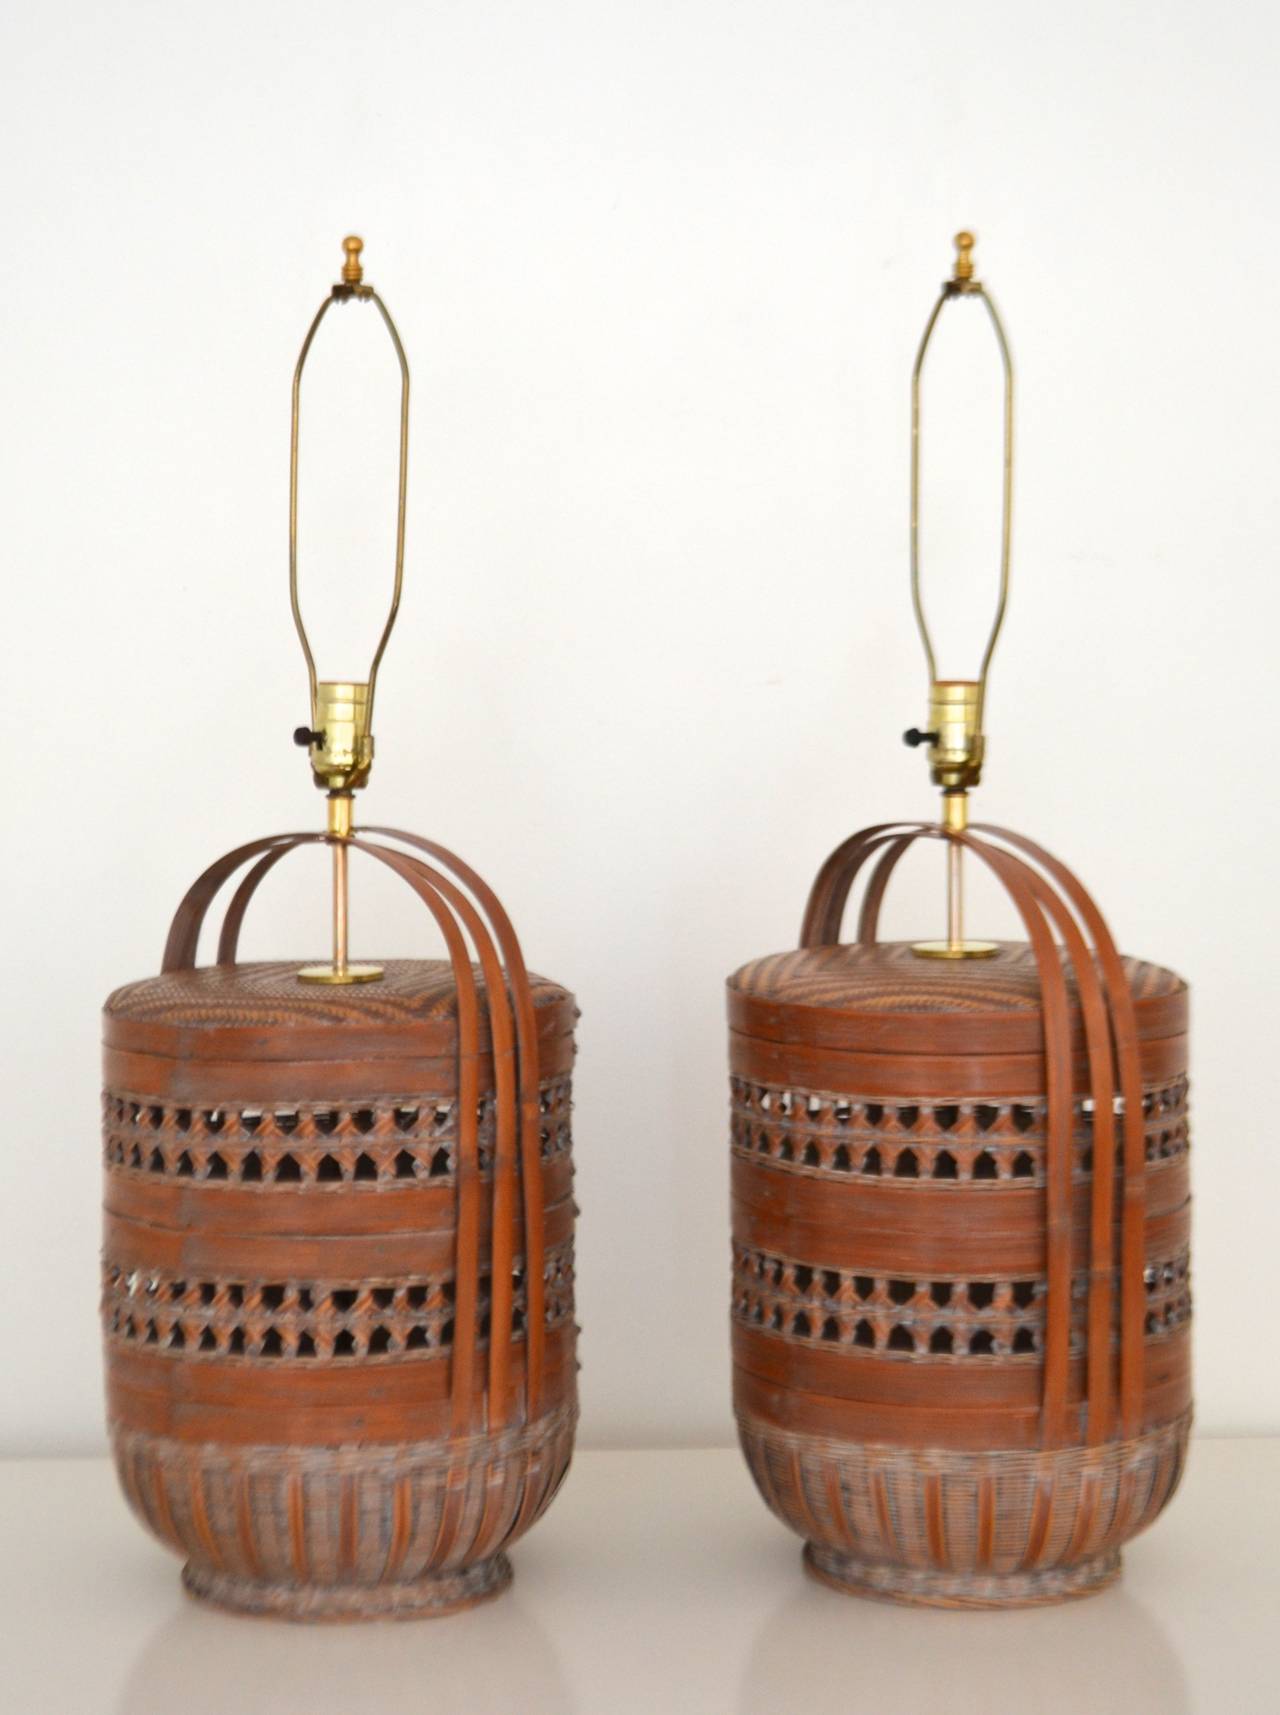 Polished Pair of Woven Reed Basket Lamps